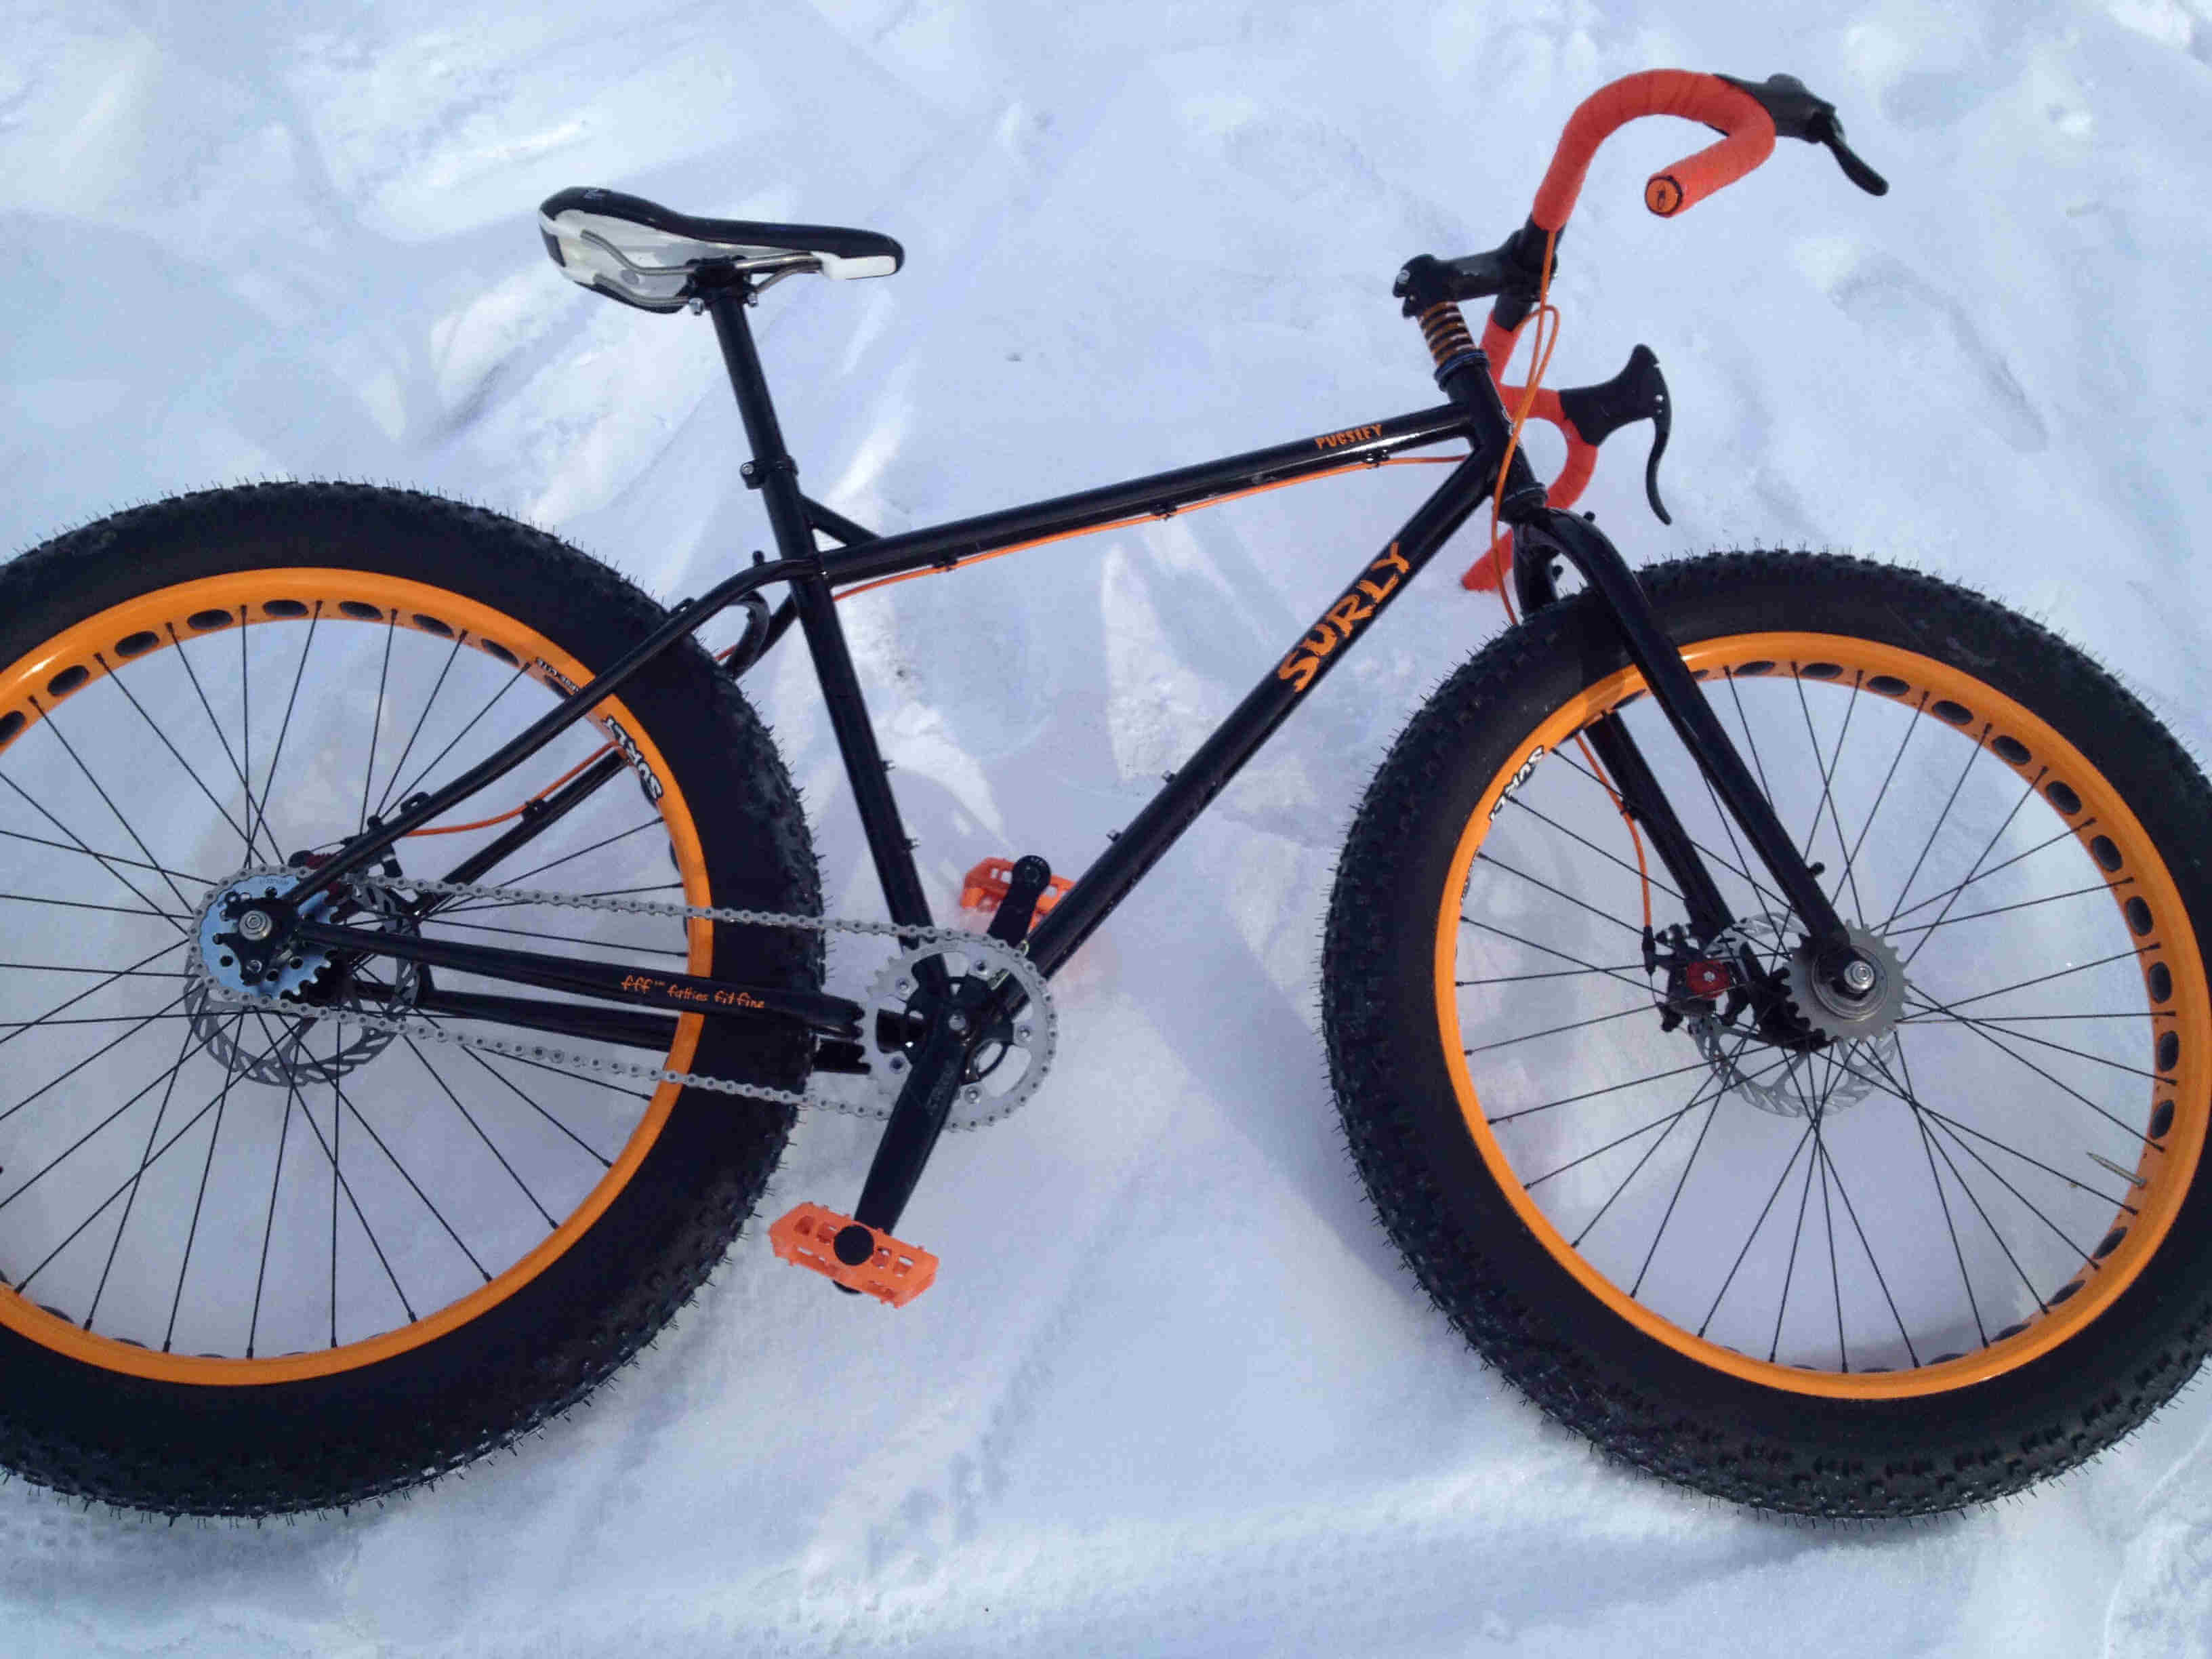 Downward, right side view of a black Surly Pugsley bike with orange rims, laying on it's left side in snow